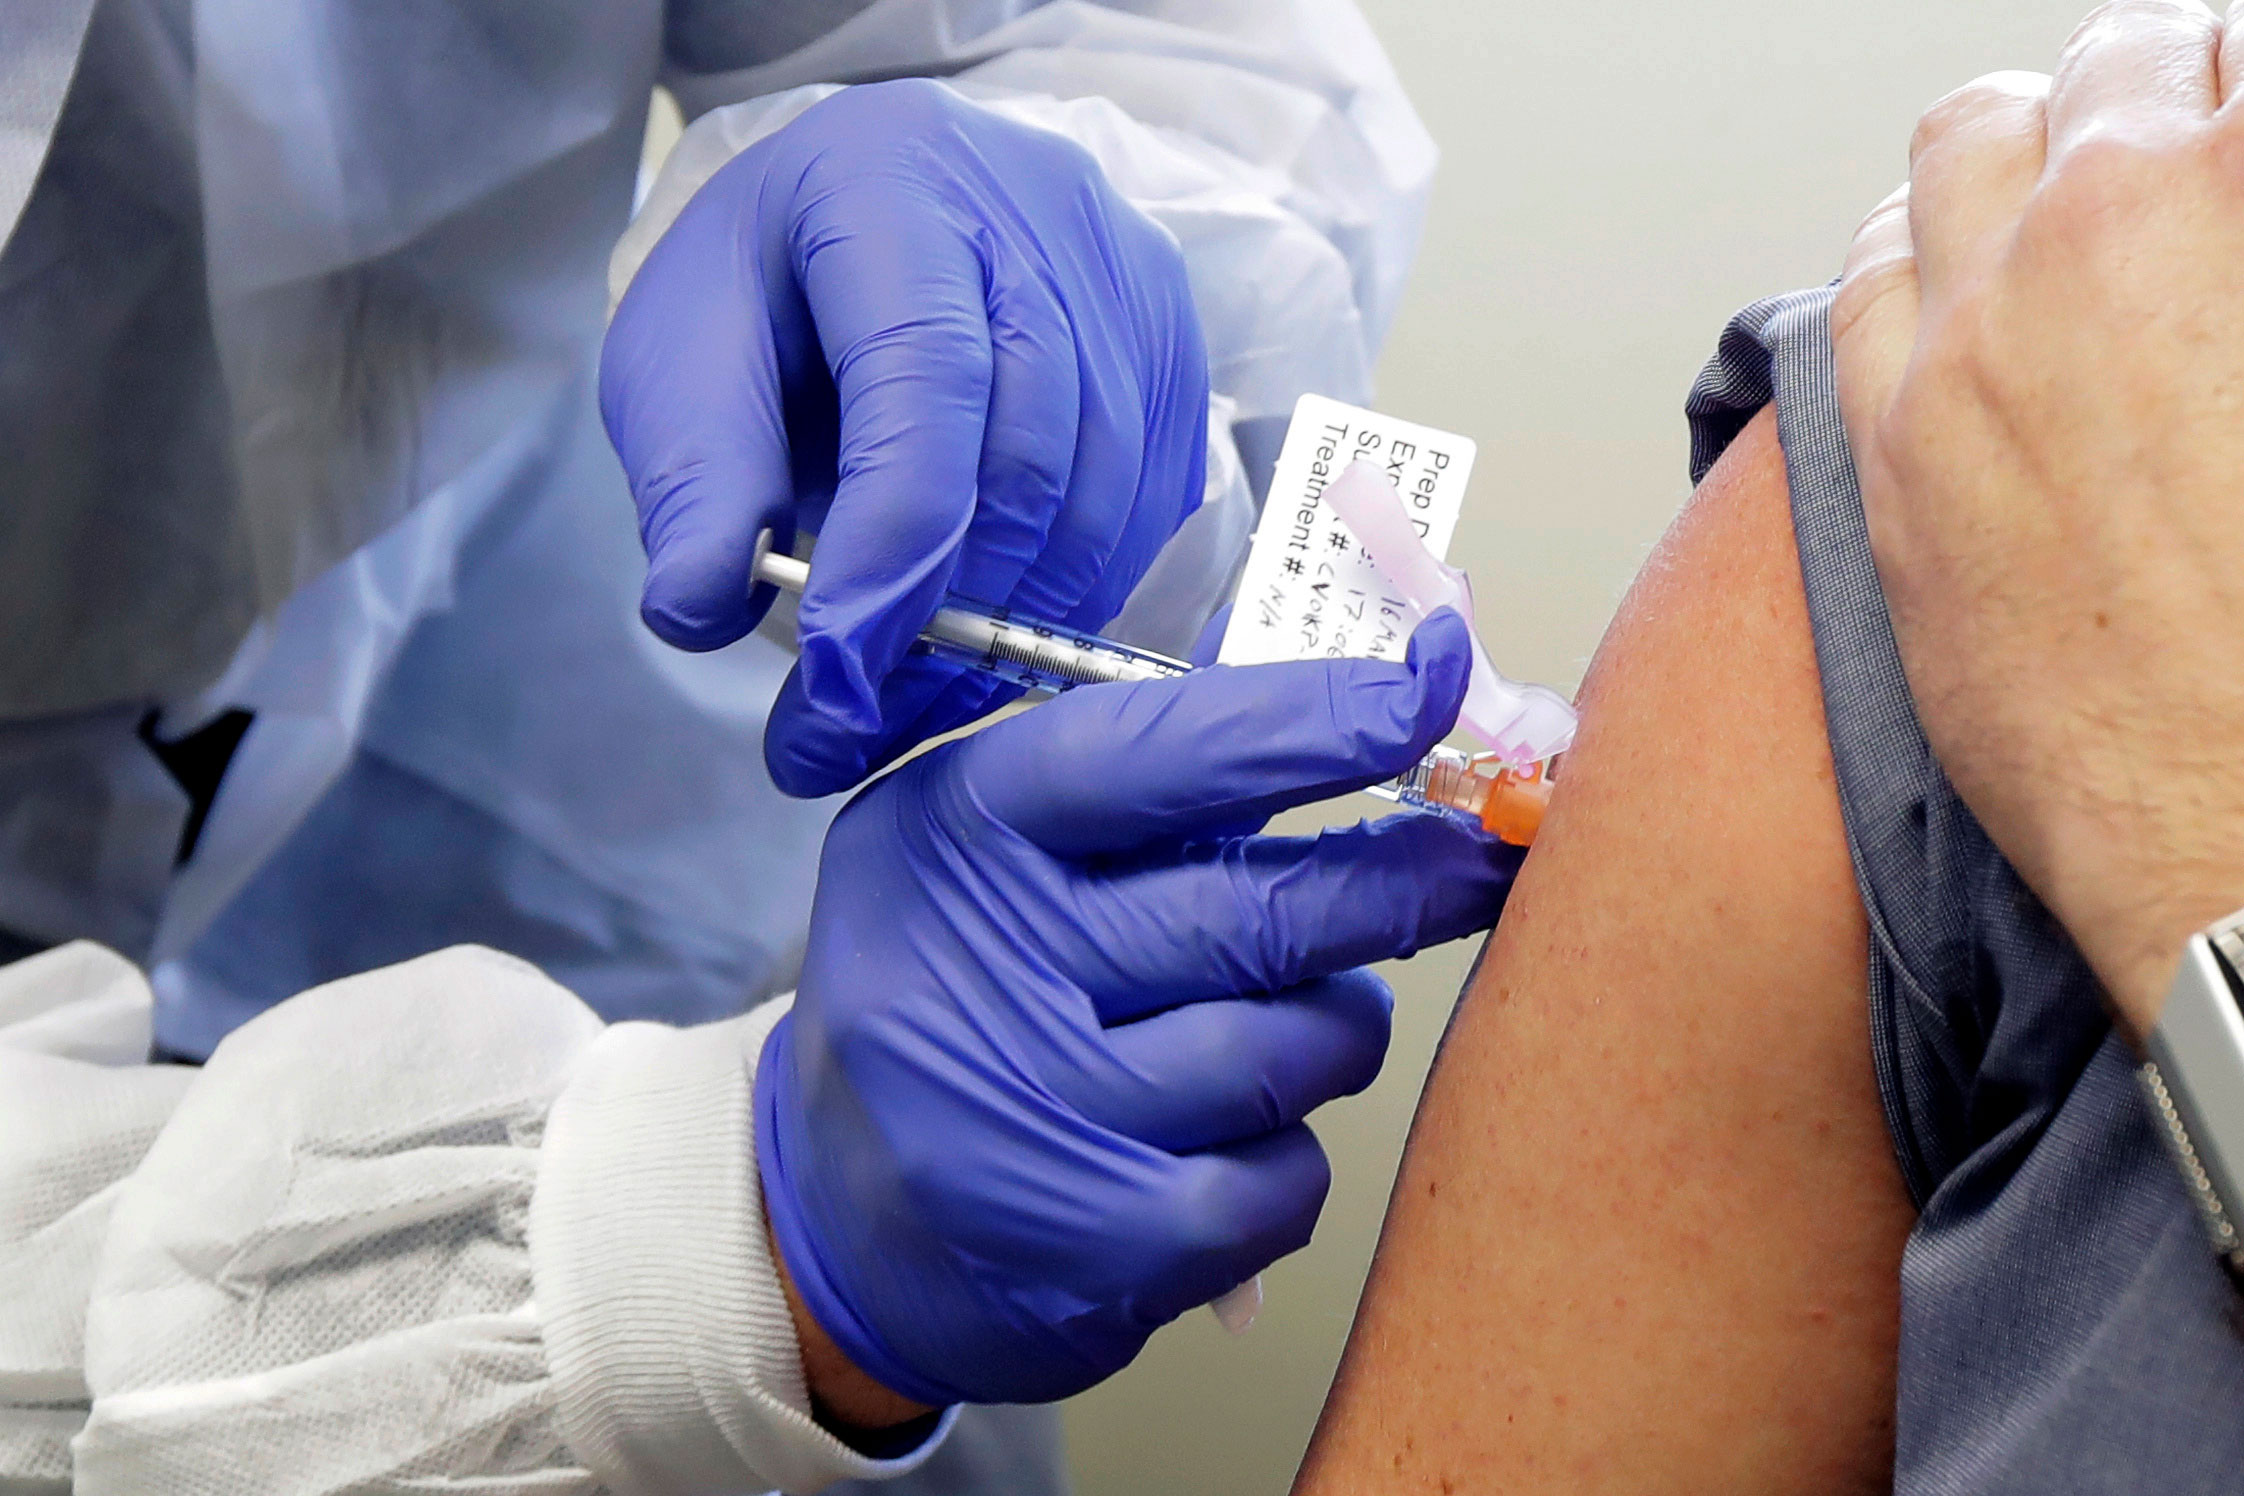 A subject receives a shot in March, during the first-stage clinical trial of a potential coronavirus vaccine.